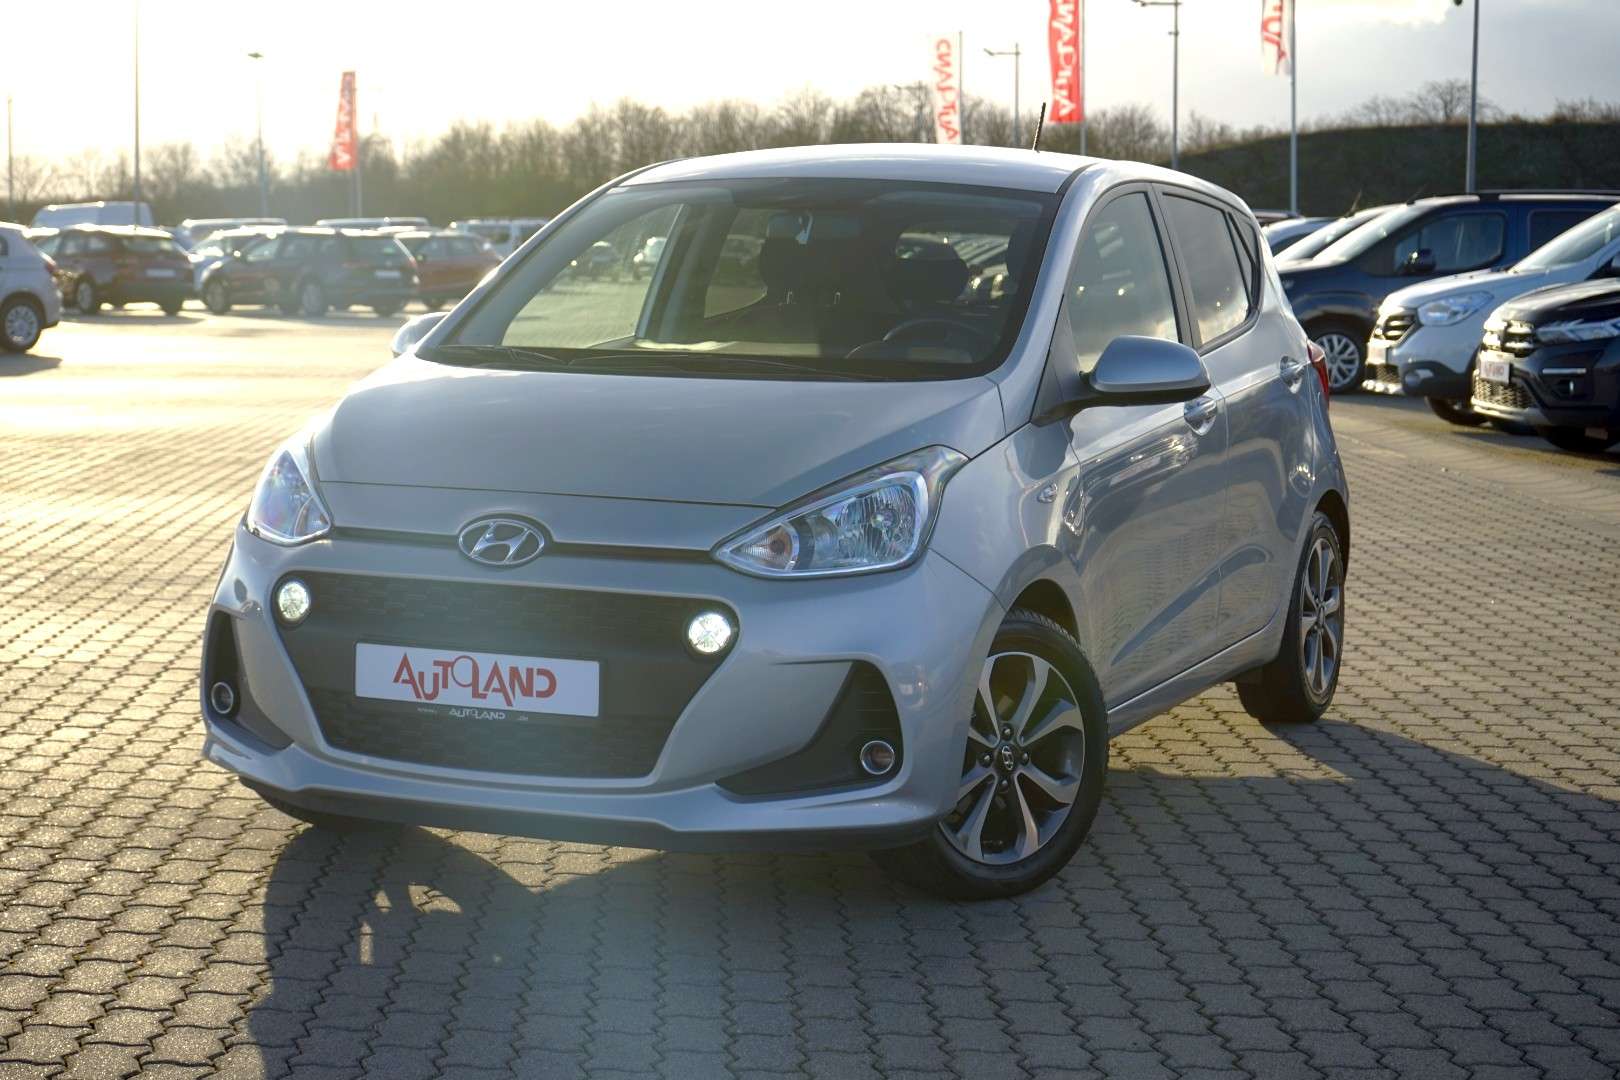 Hyundai i10 Compact in Grey used in Brehna for € 11,990.-